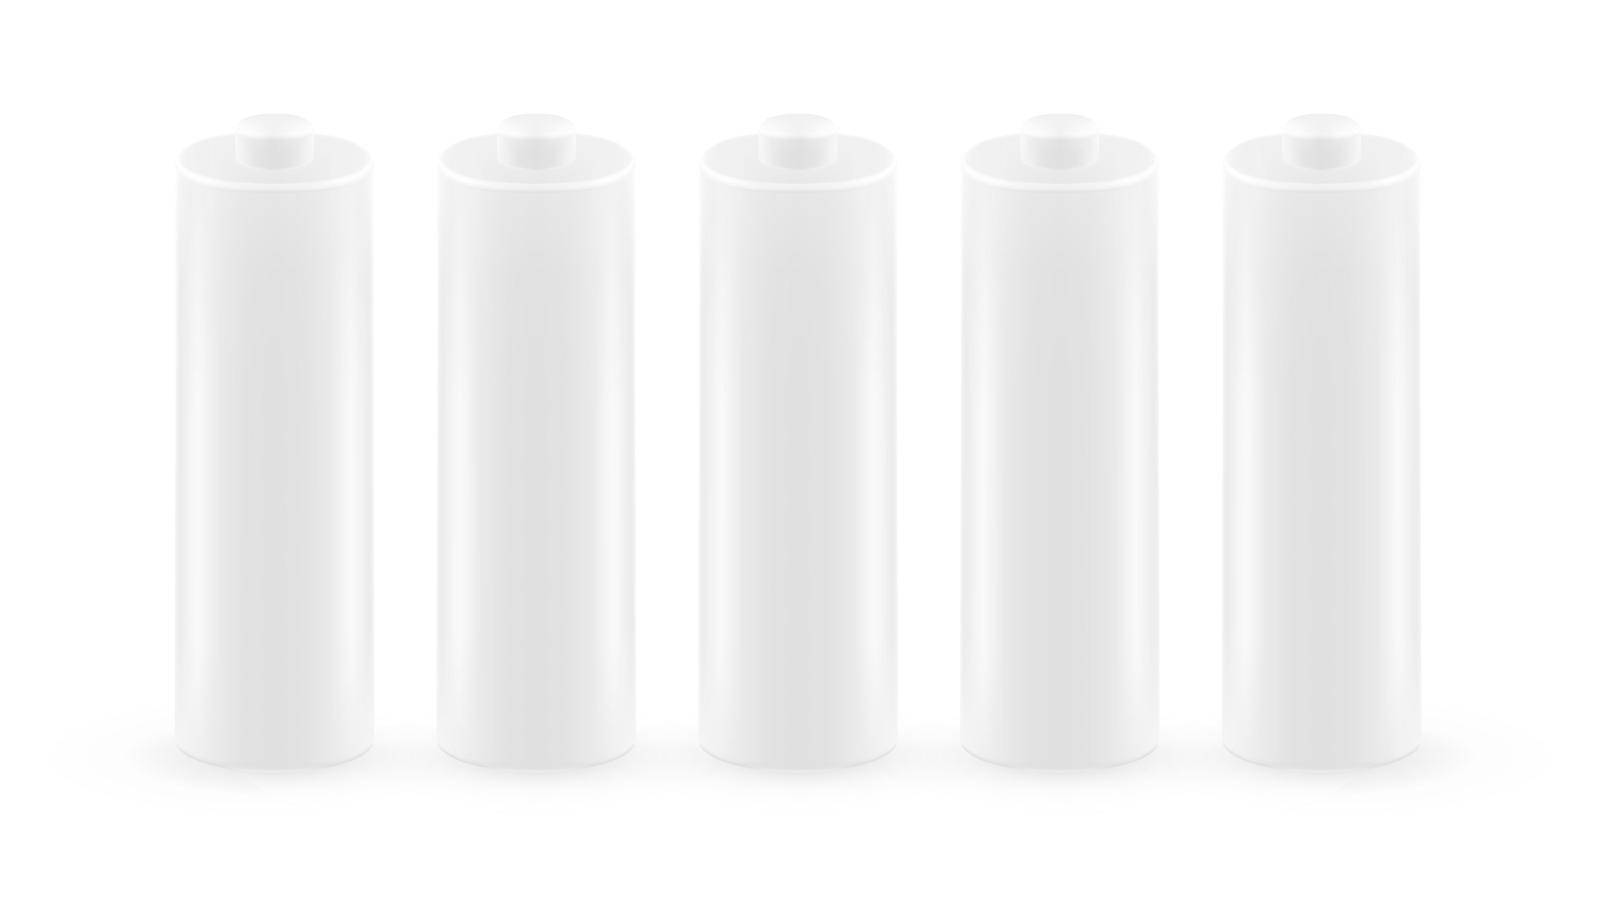 Five Clear White Battery Template by VectorThings